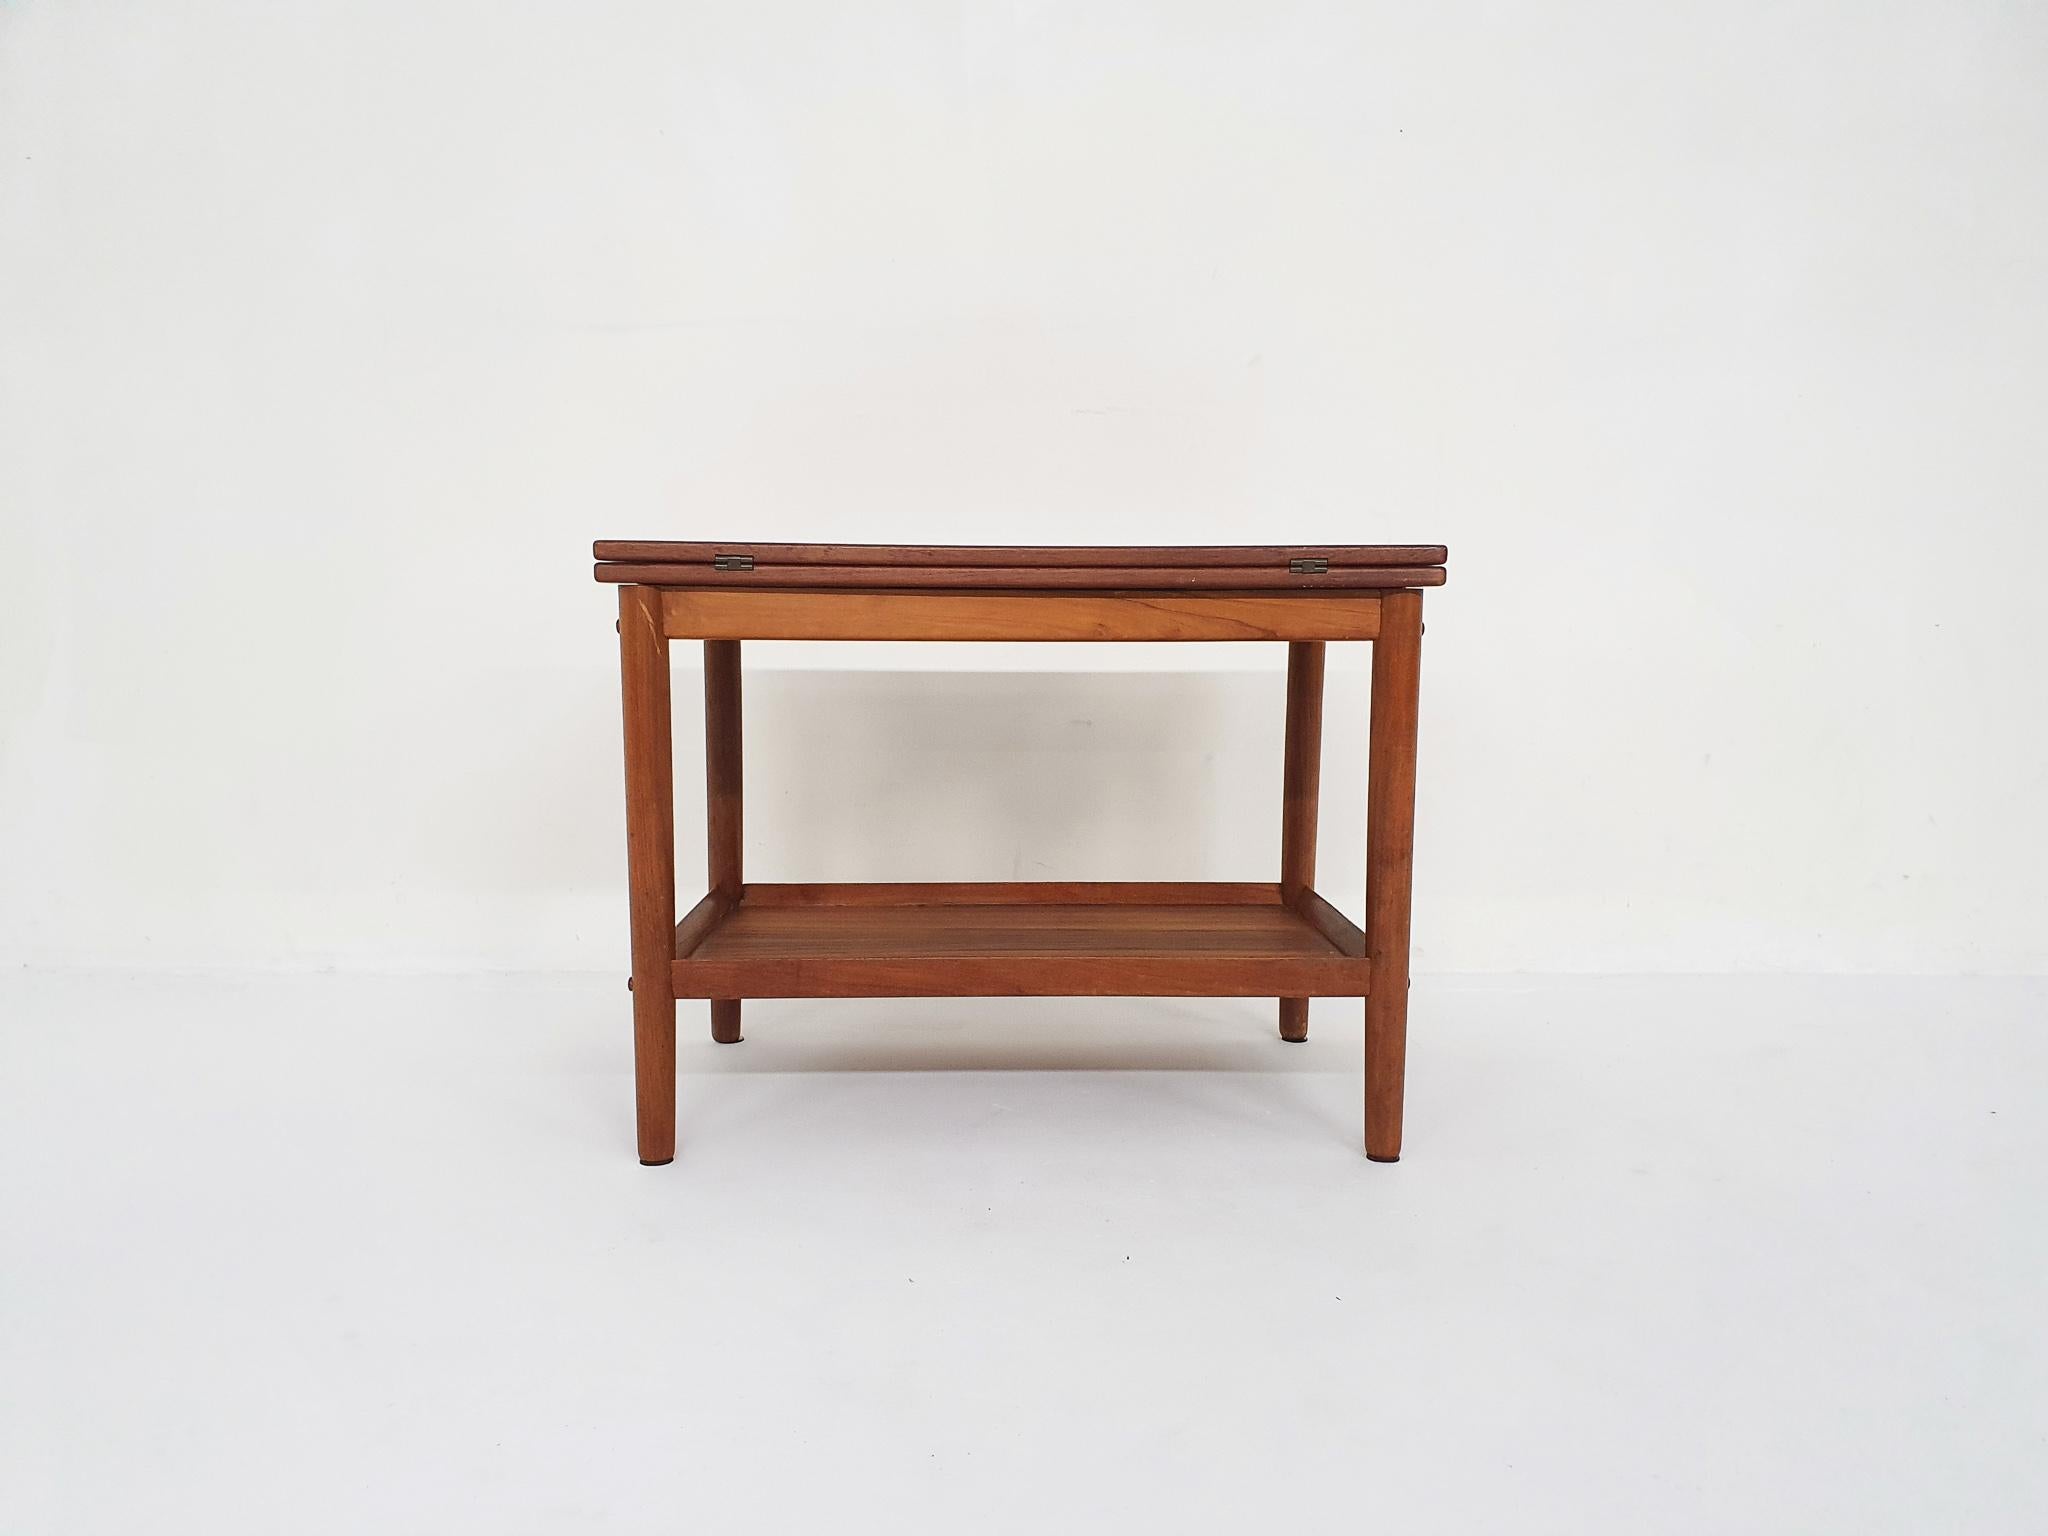 Teak side table. The top can rotate and flips open. Then it creates a space of 70 x 90 cm
The pin to rotate the table top have been replaced. The top and the bottom shelf have been refinished.

Grete Jalk (1920 - 2006) was a Danish industrial